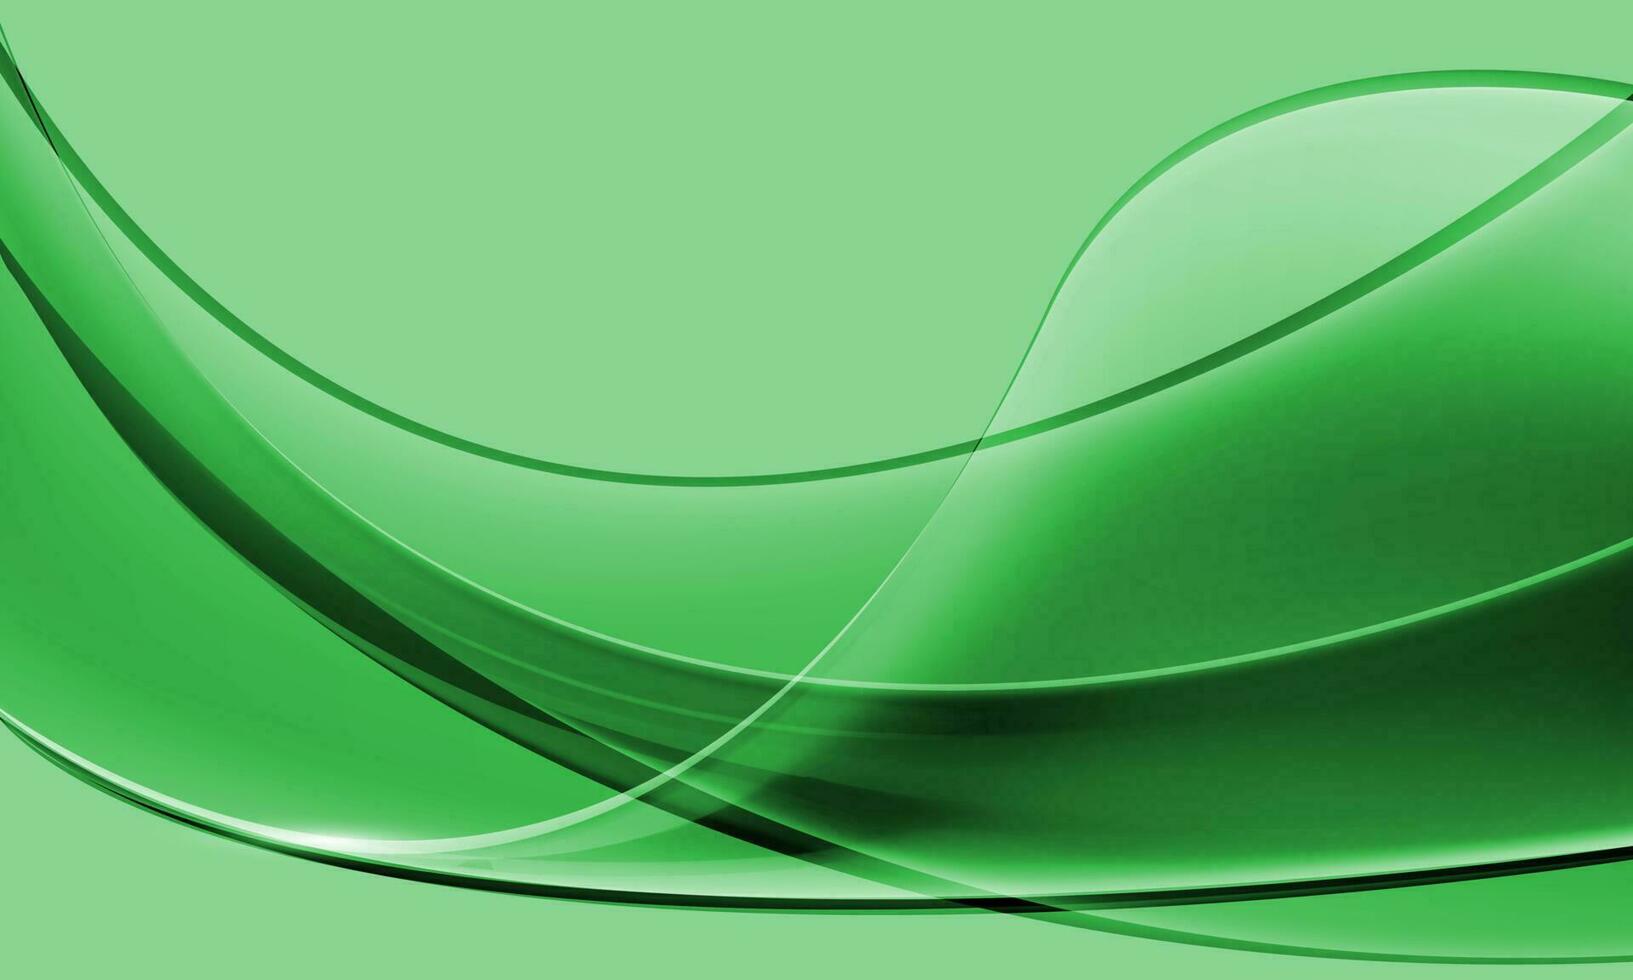 Realistic abstract grass curve wave on green design modern luxury futuristic creative background vector